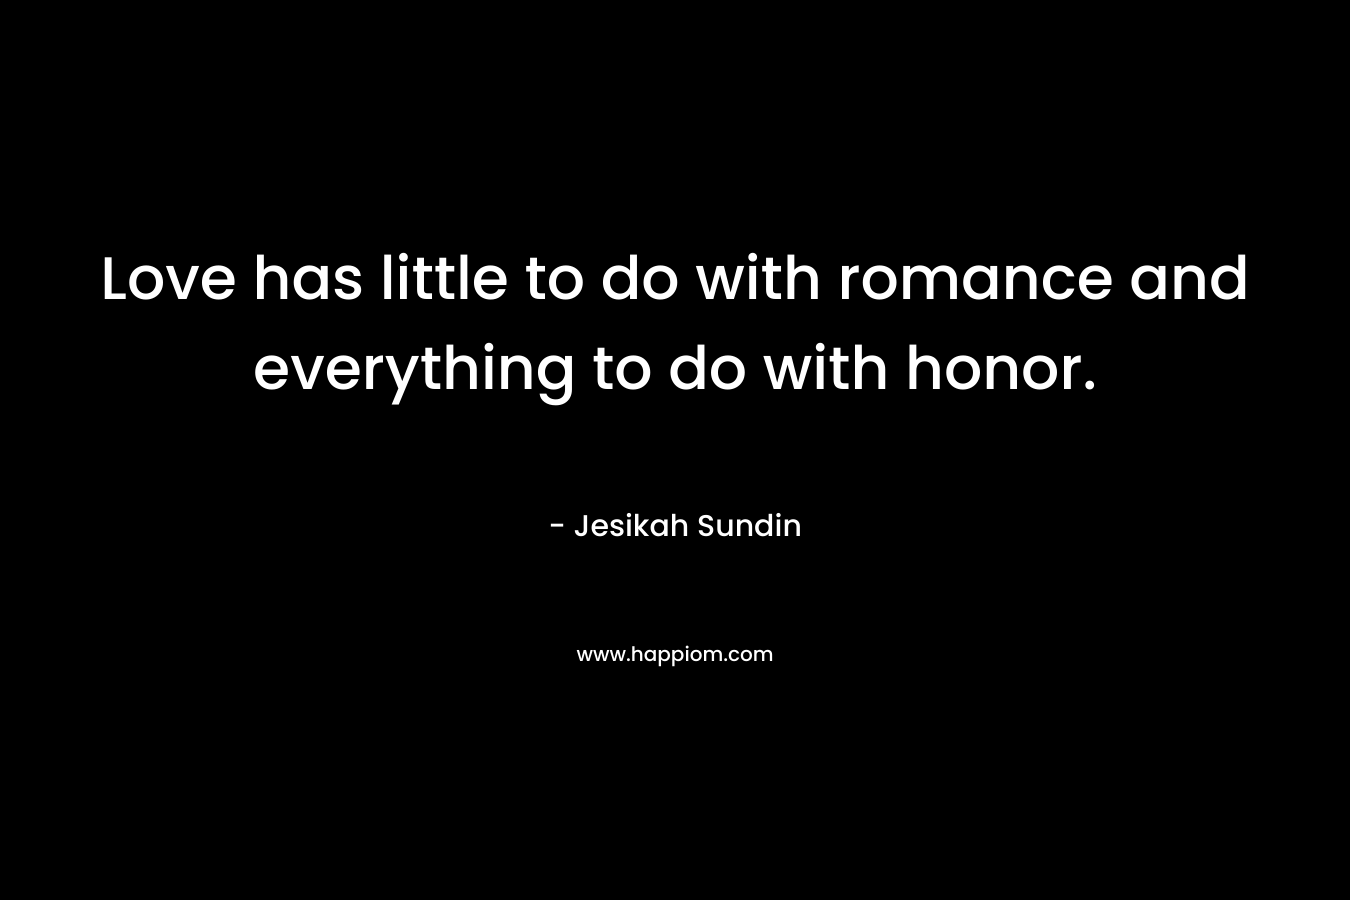 Love has little to do with romance and everything to do with honor. – Jesikah Sundin